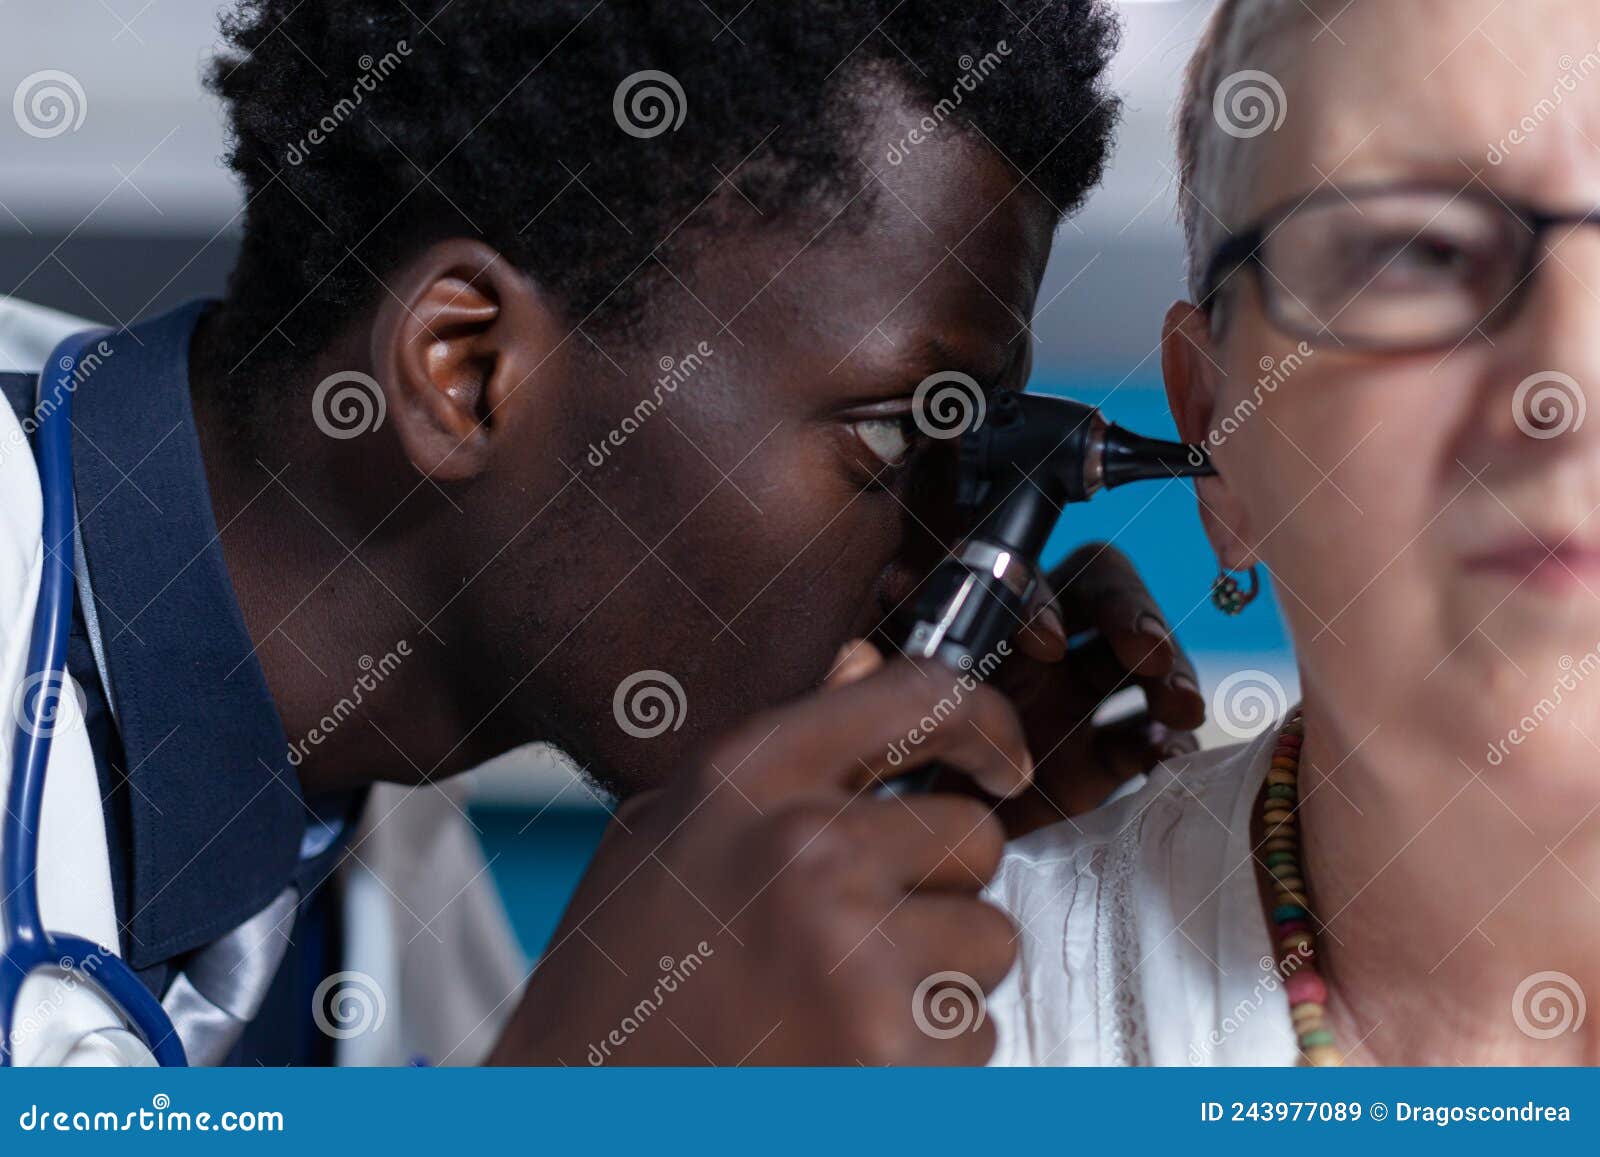 close up of otology specialist examining ill elderly patient while using otoscope